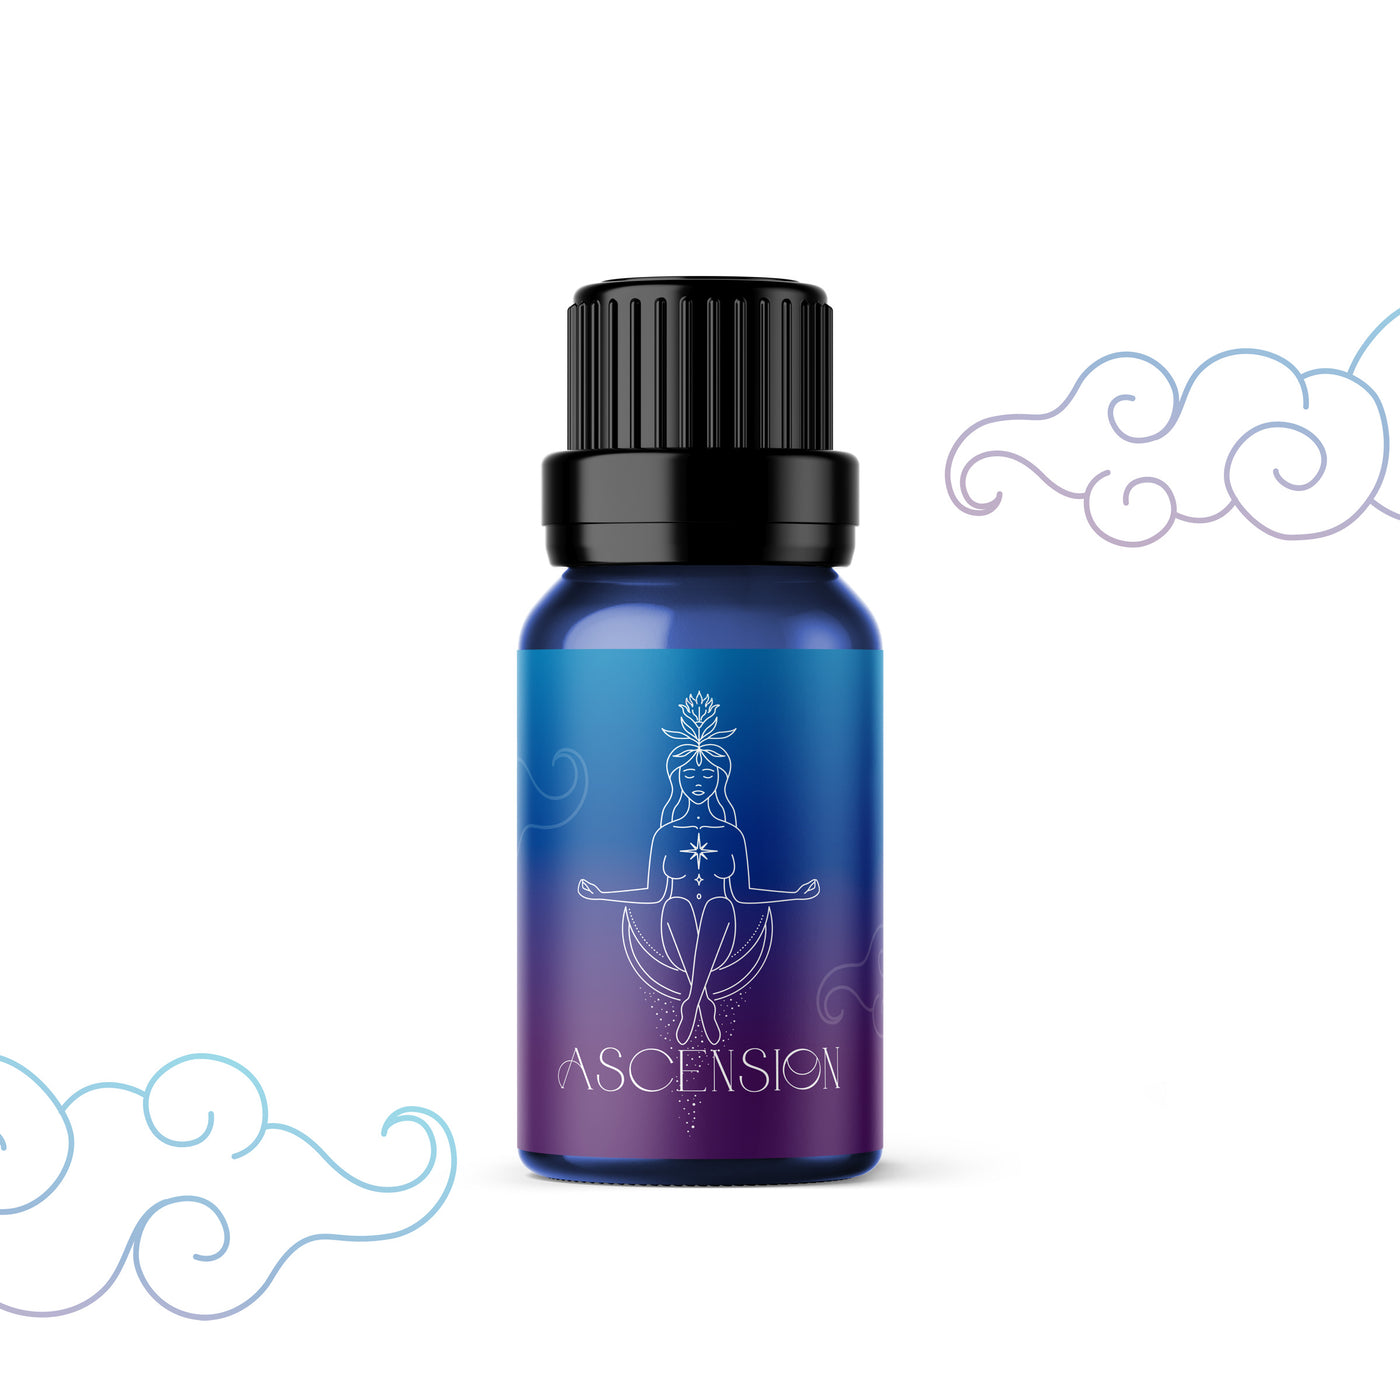 Ascension - synergie aromatique 100% pure